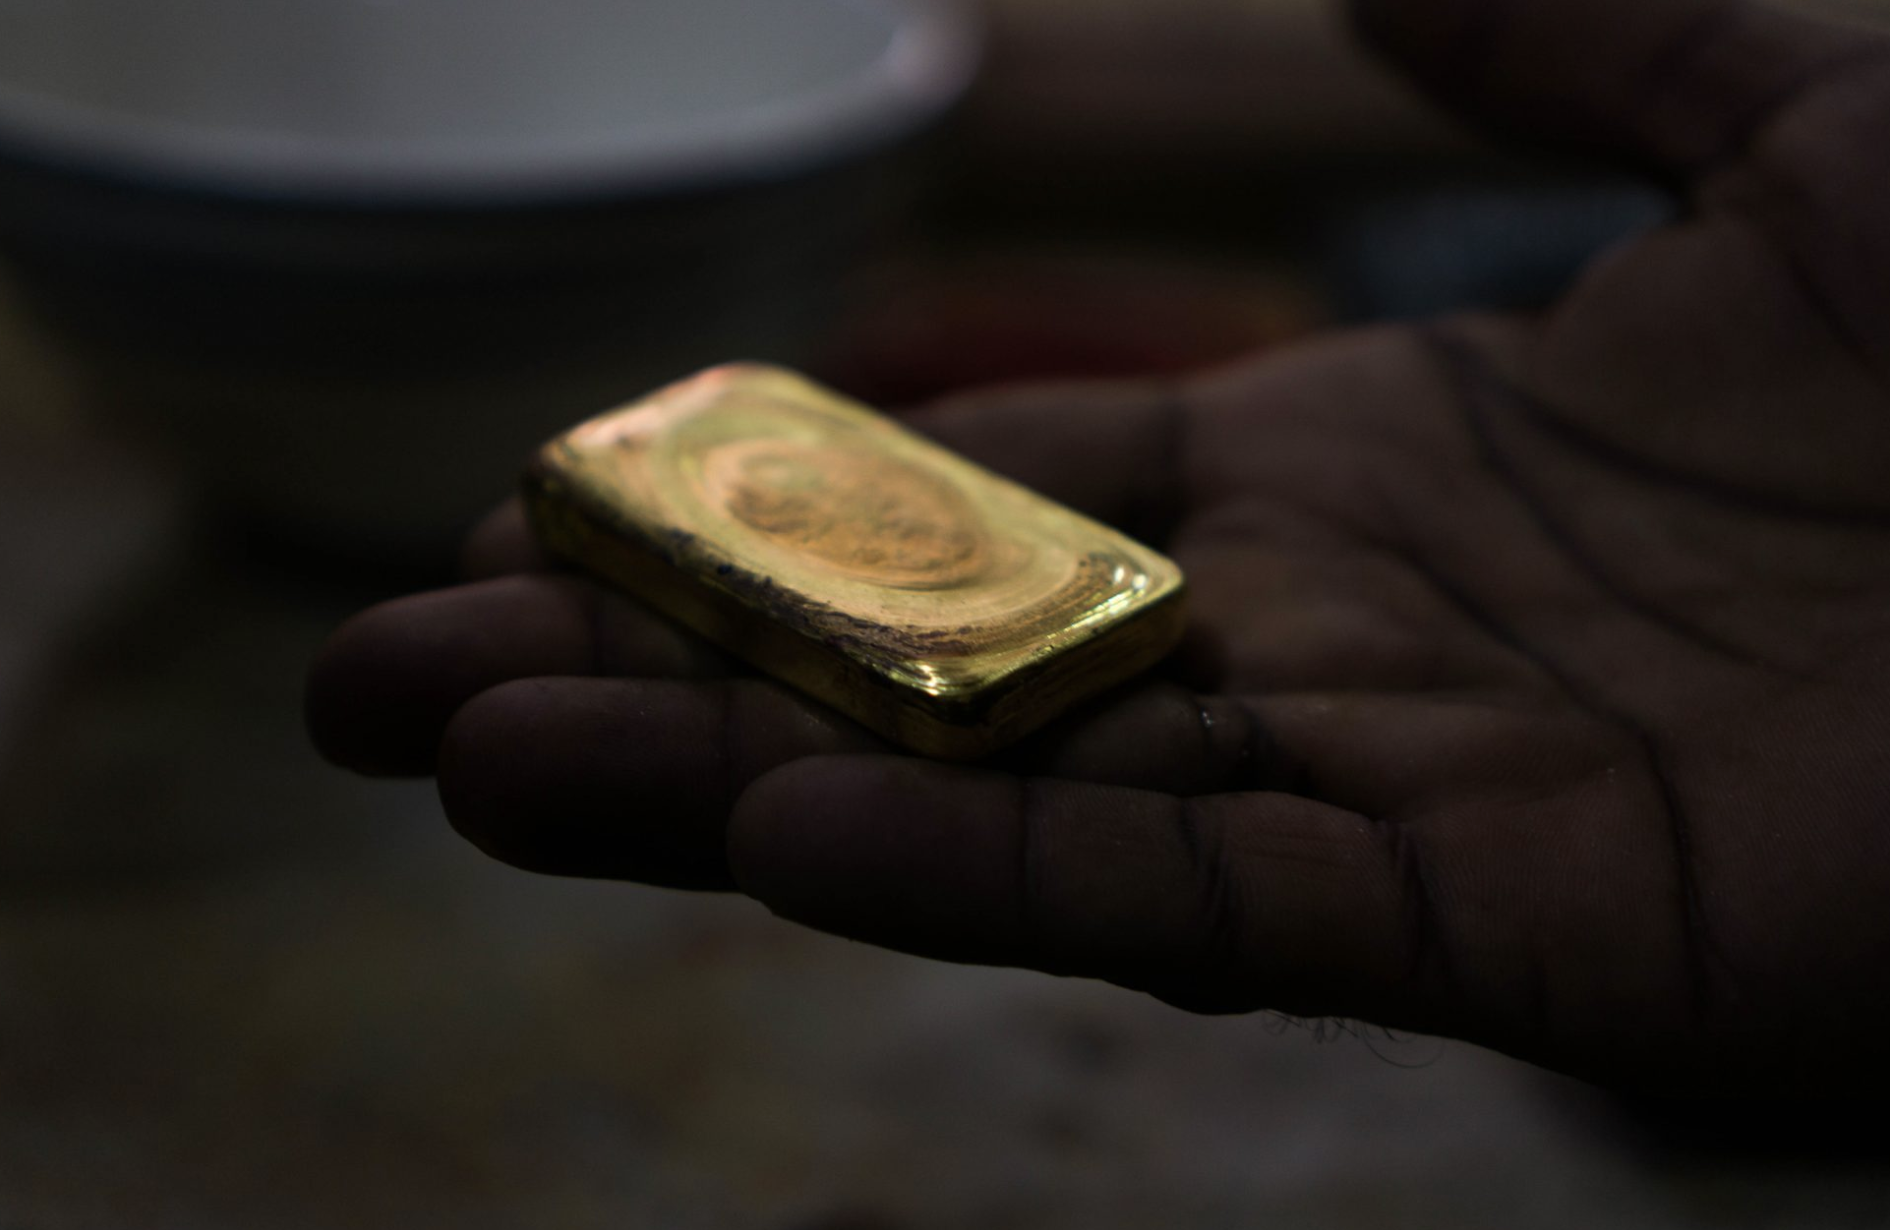 A miner shows the gold bar shaped after he 'burns' the raw gold to remove residual mercury and further refine the precious metal. Image by Bram Ebus. Guyana, undated.